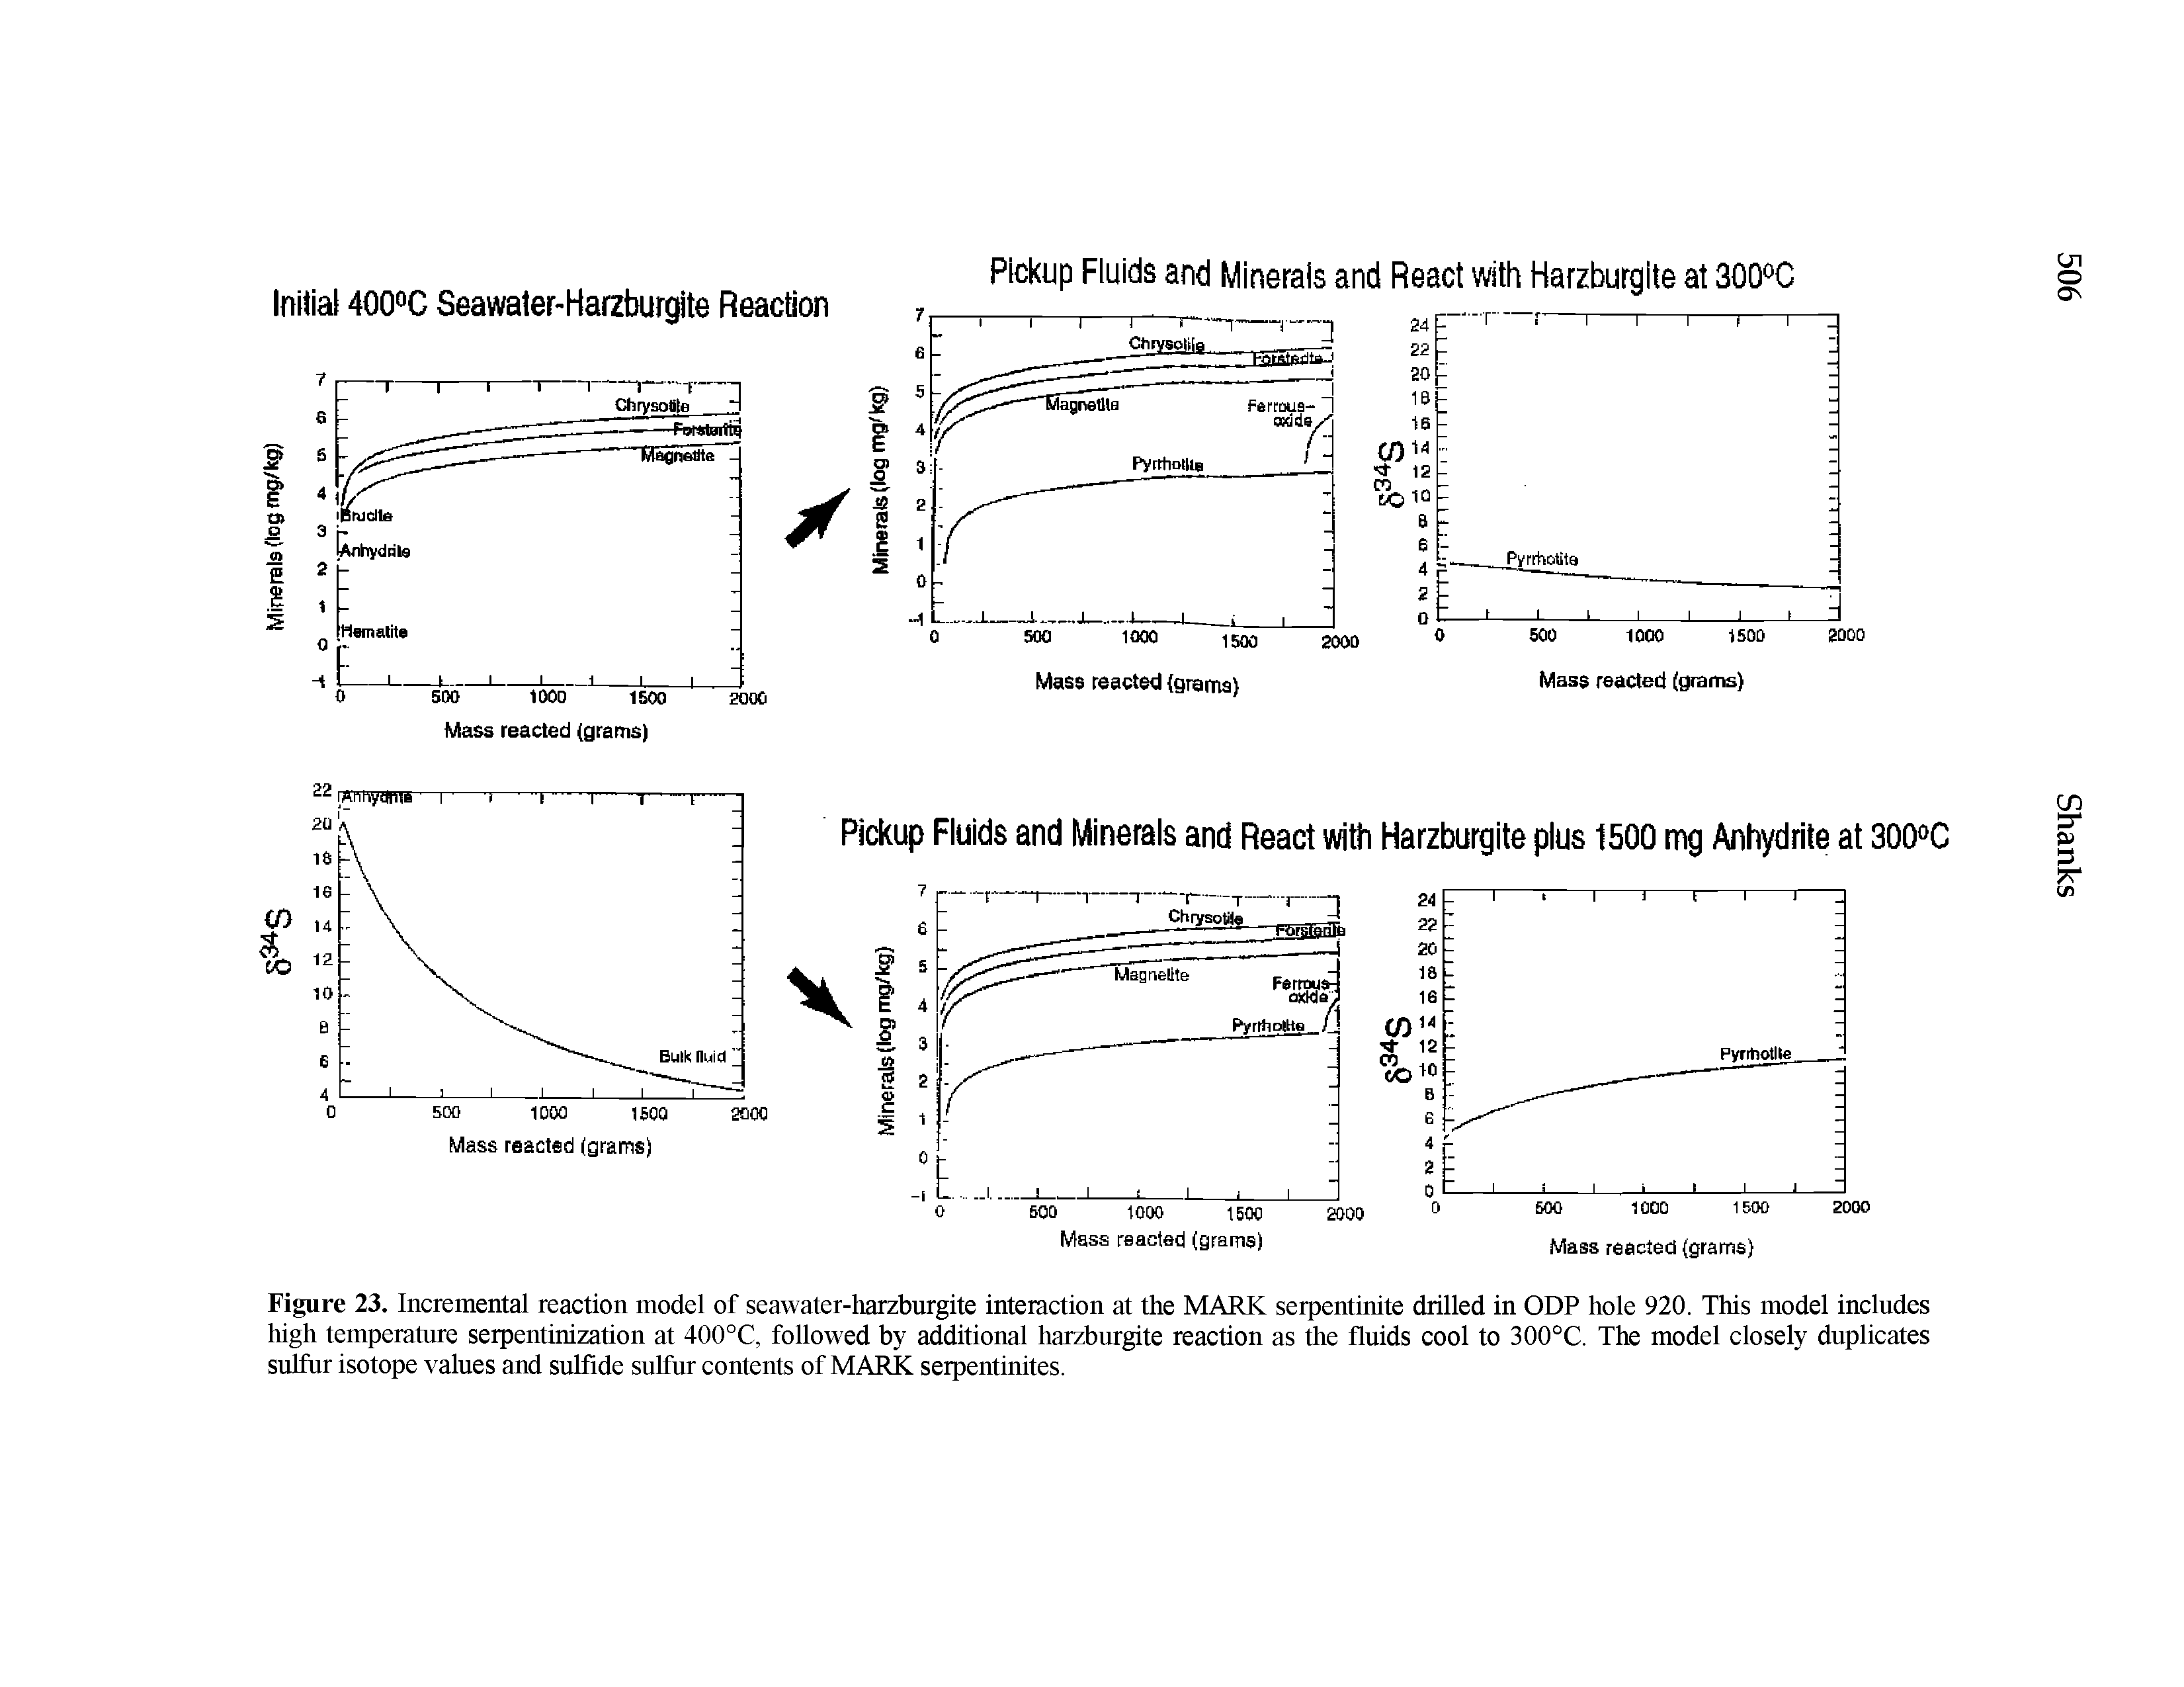 Figure 23. Incremental reaction model of seawater-harzburgite interaction at the MARK serpentinite drilled in ODP hole 920. This model inclndes high temperatnre serpentinization at 400°C, followed by additional harzbnrgite reaction as the fluids cool to 300°C. The model closely duplicates sulfur isotope values and sulfide sulfur contents of MARK serpentinites.